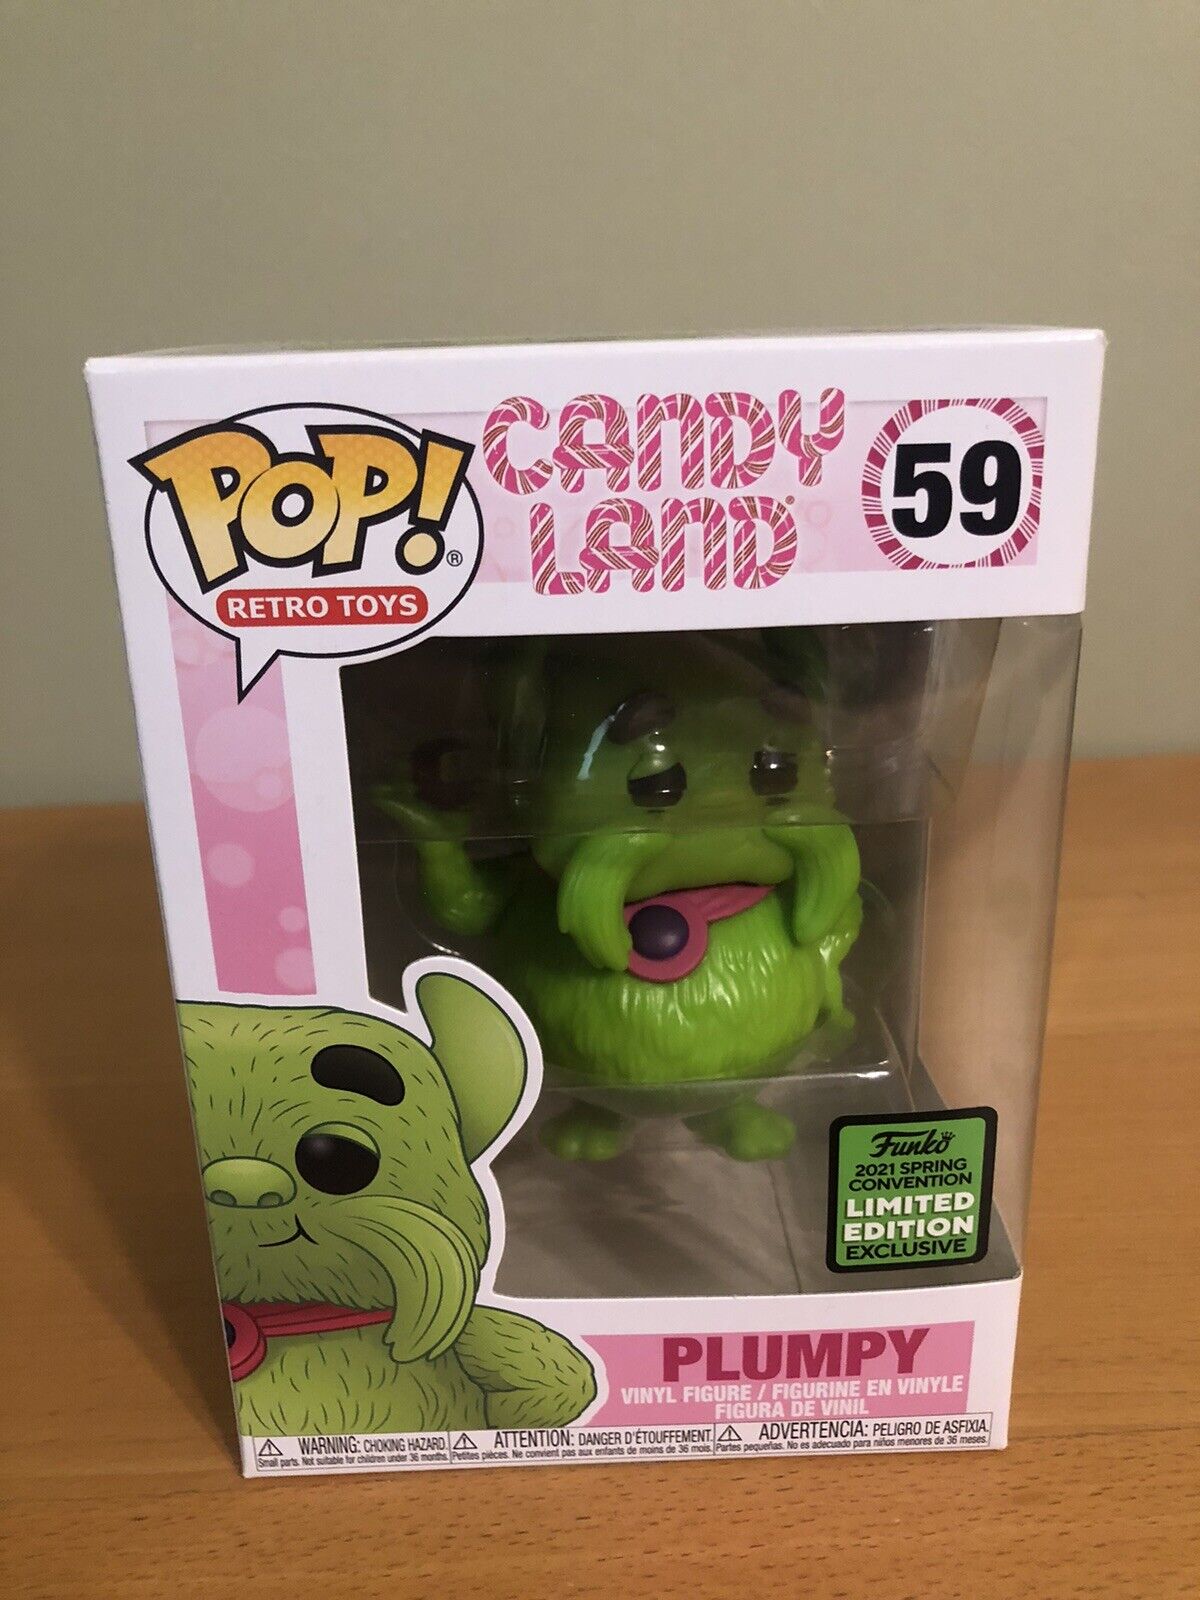 Funko POP Retro Toys Plumpy Candyland Game 2021 Spring Convention ECCC Exclusive